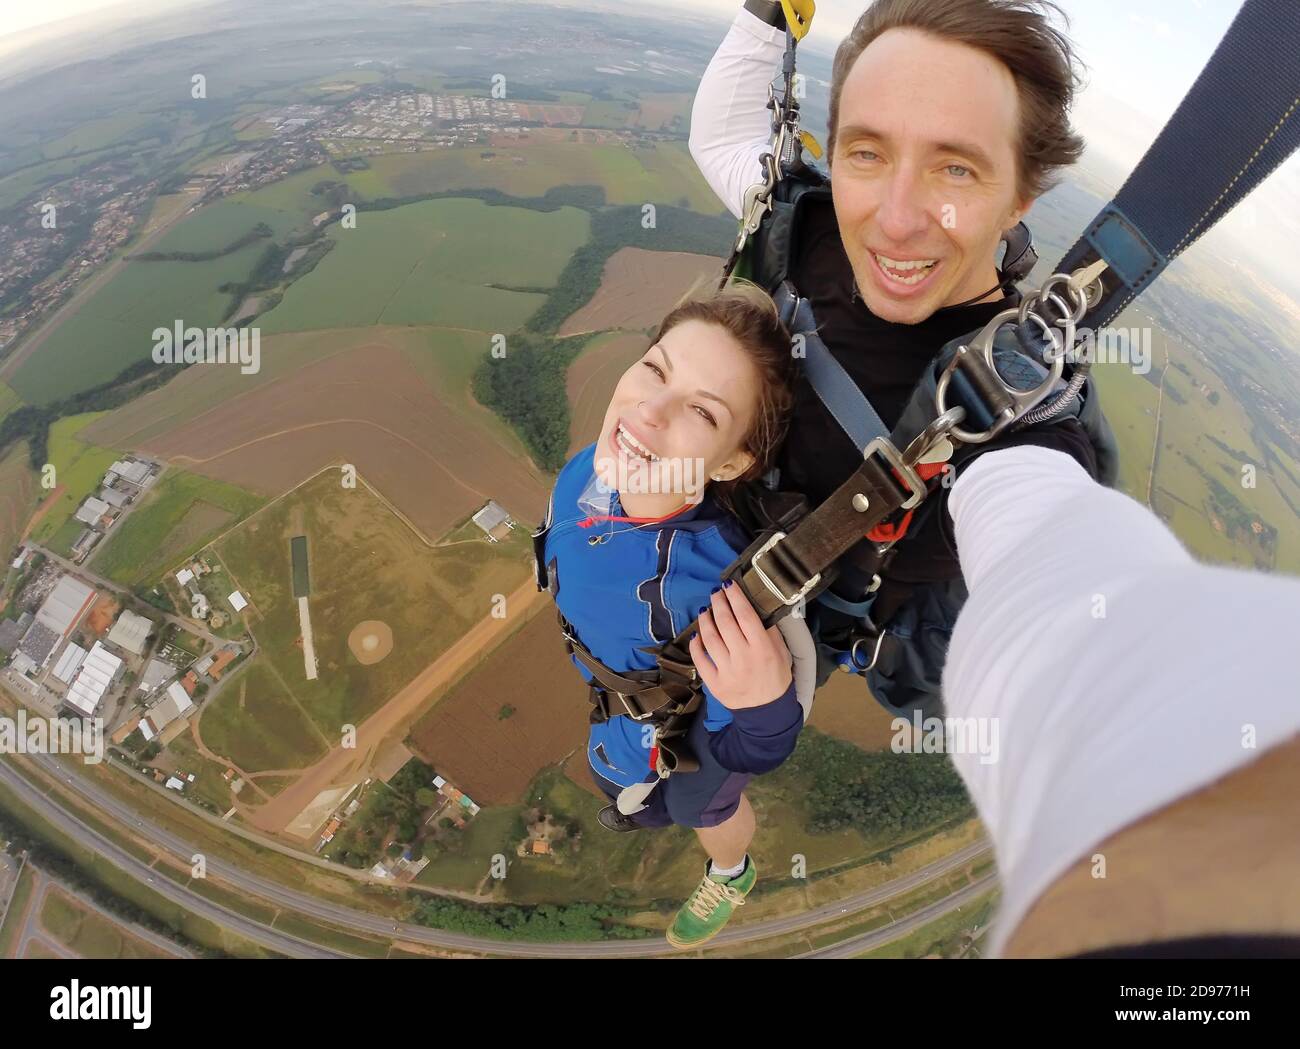 Selfie tandem skydiving with pretty woman Stock Photo